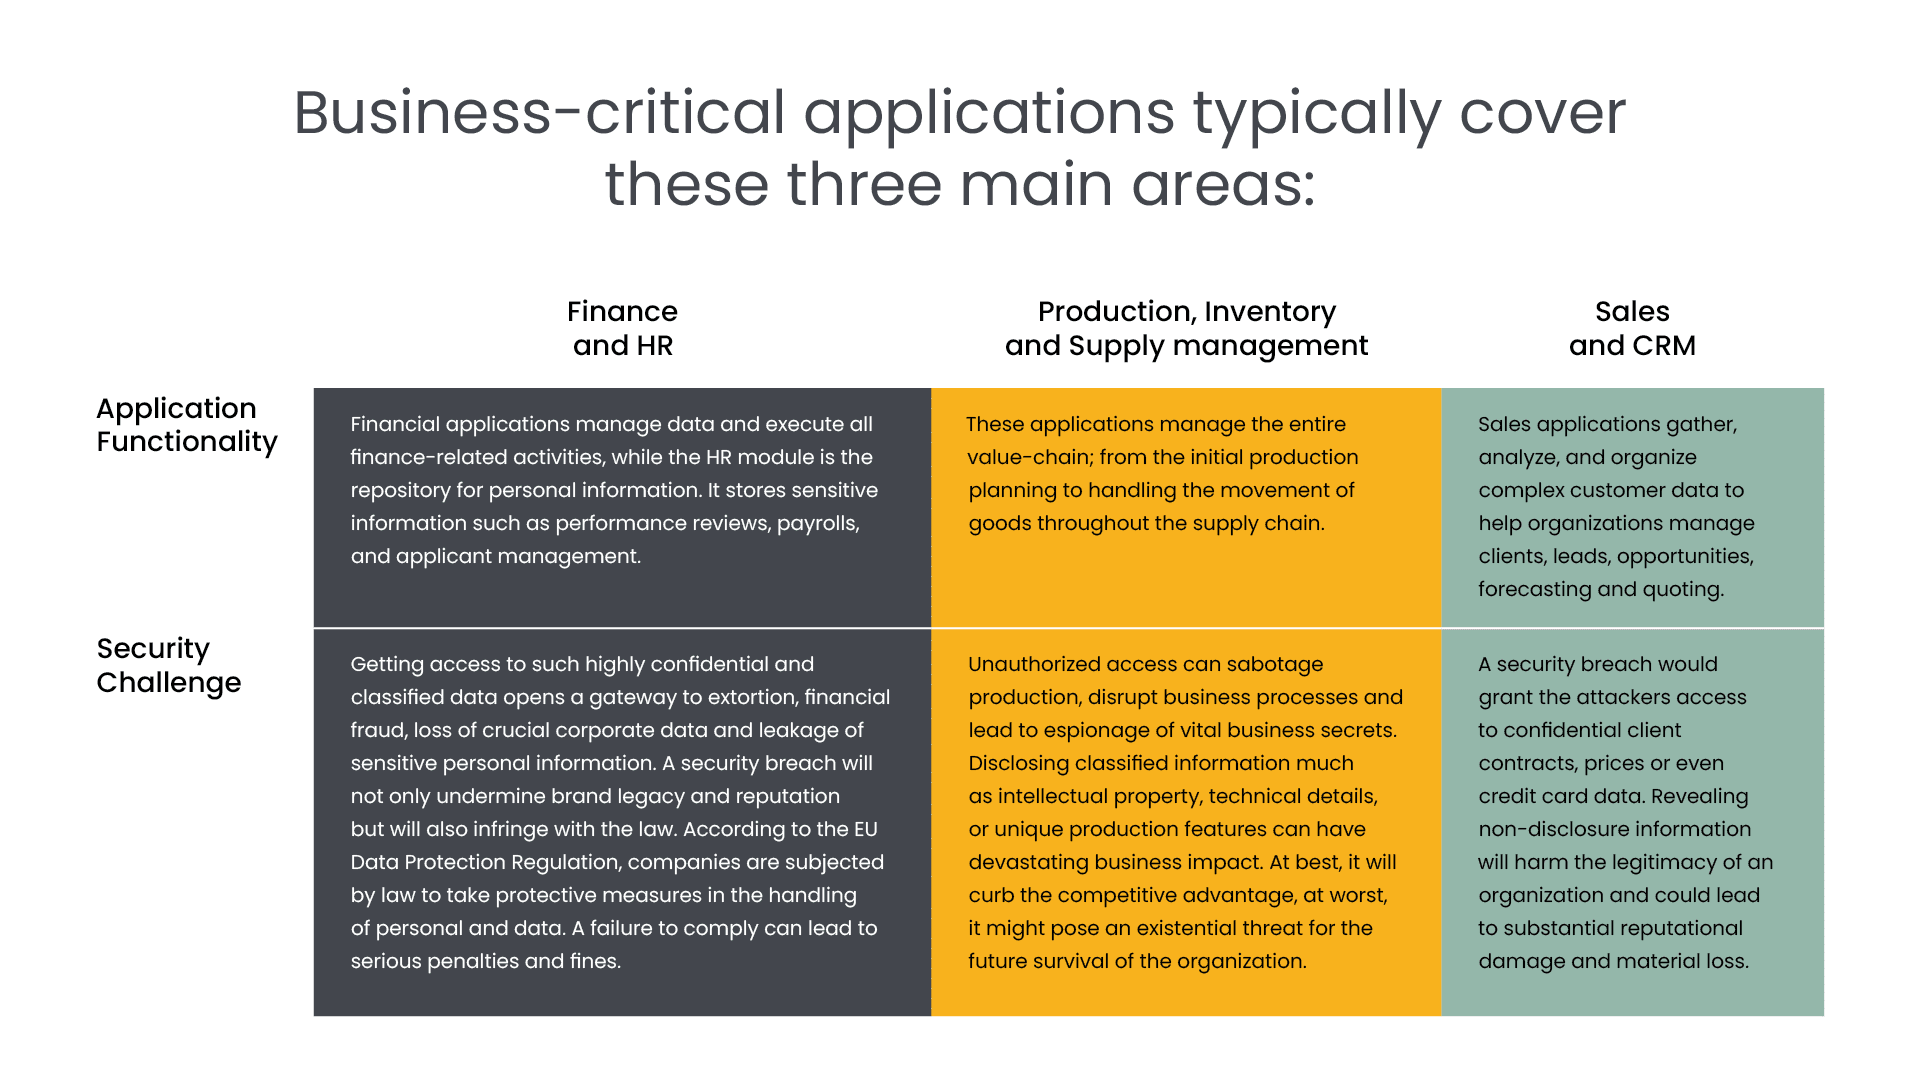 Business-critical applications typically cover these three main areas